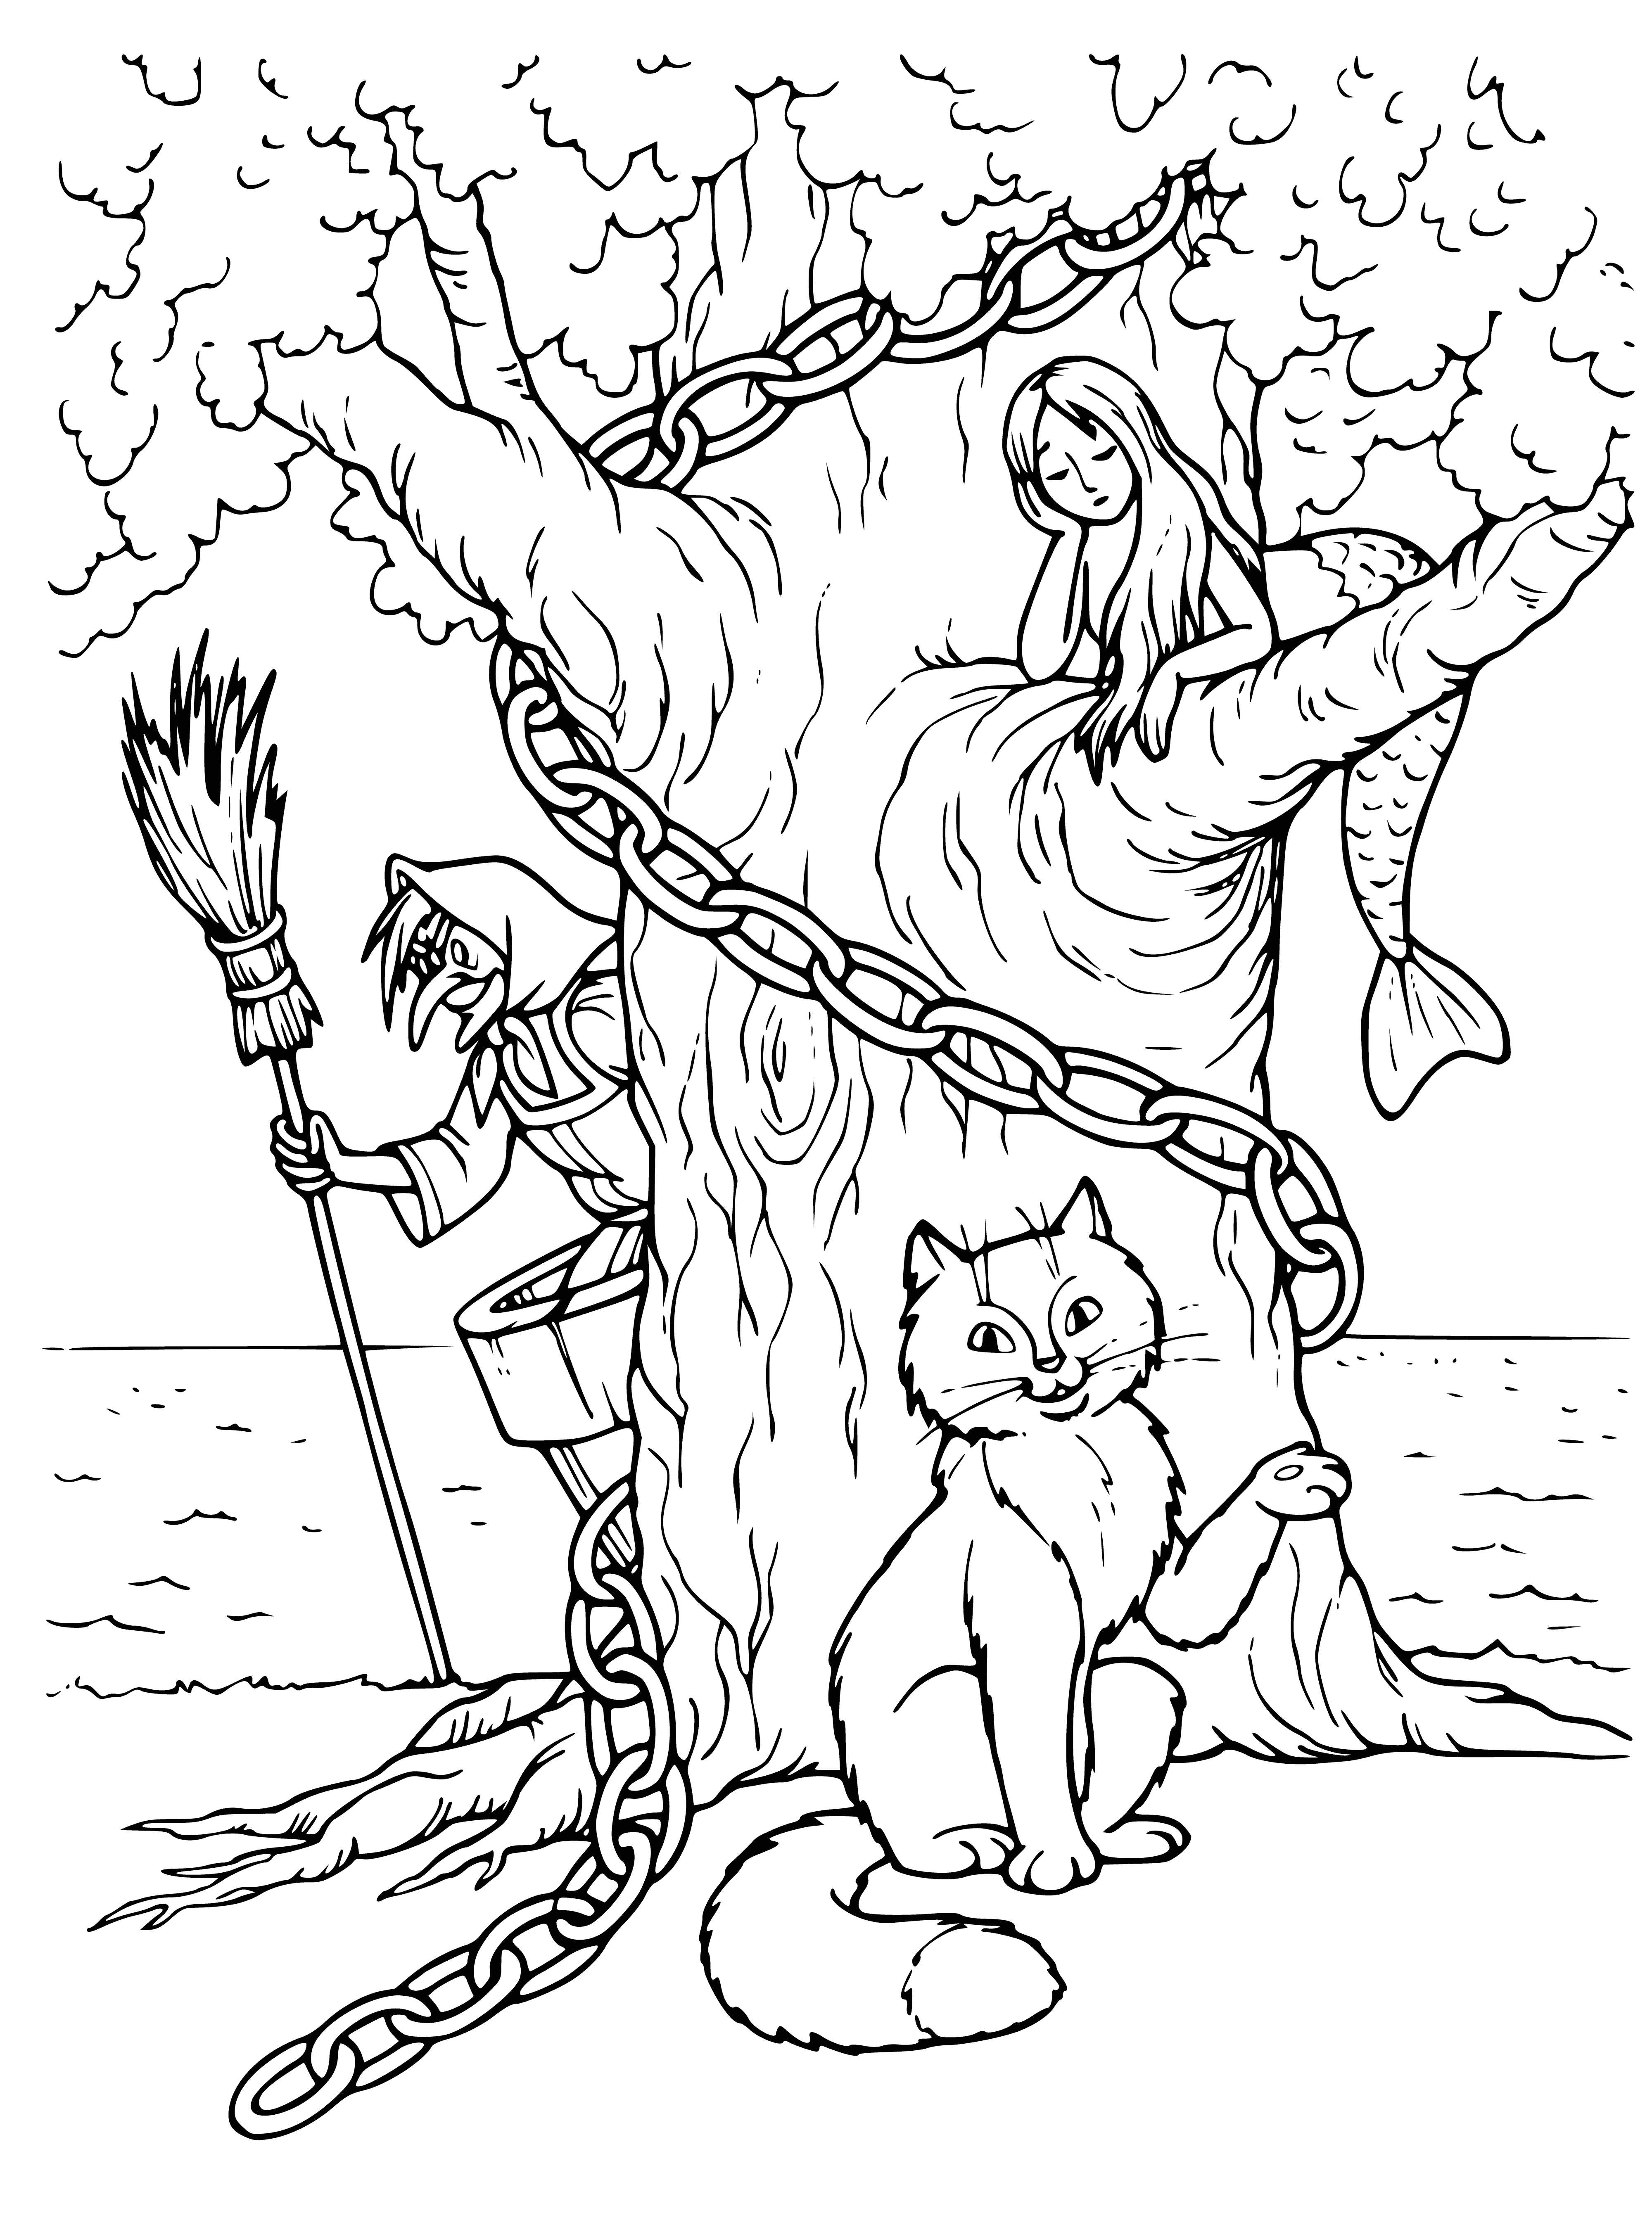 coloring page: Tales of the everyday struggles of the villagers in Lukomorye from Alexander Pushkin, told with humor and insight.